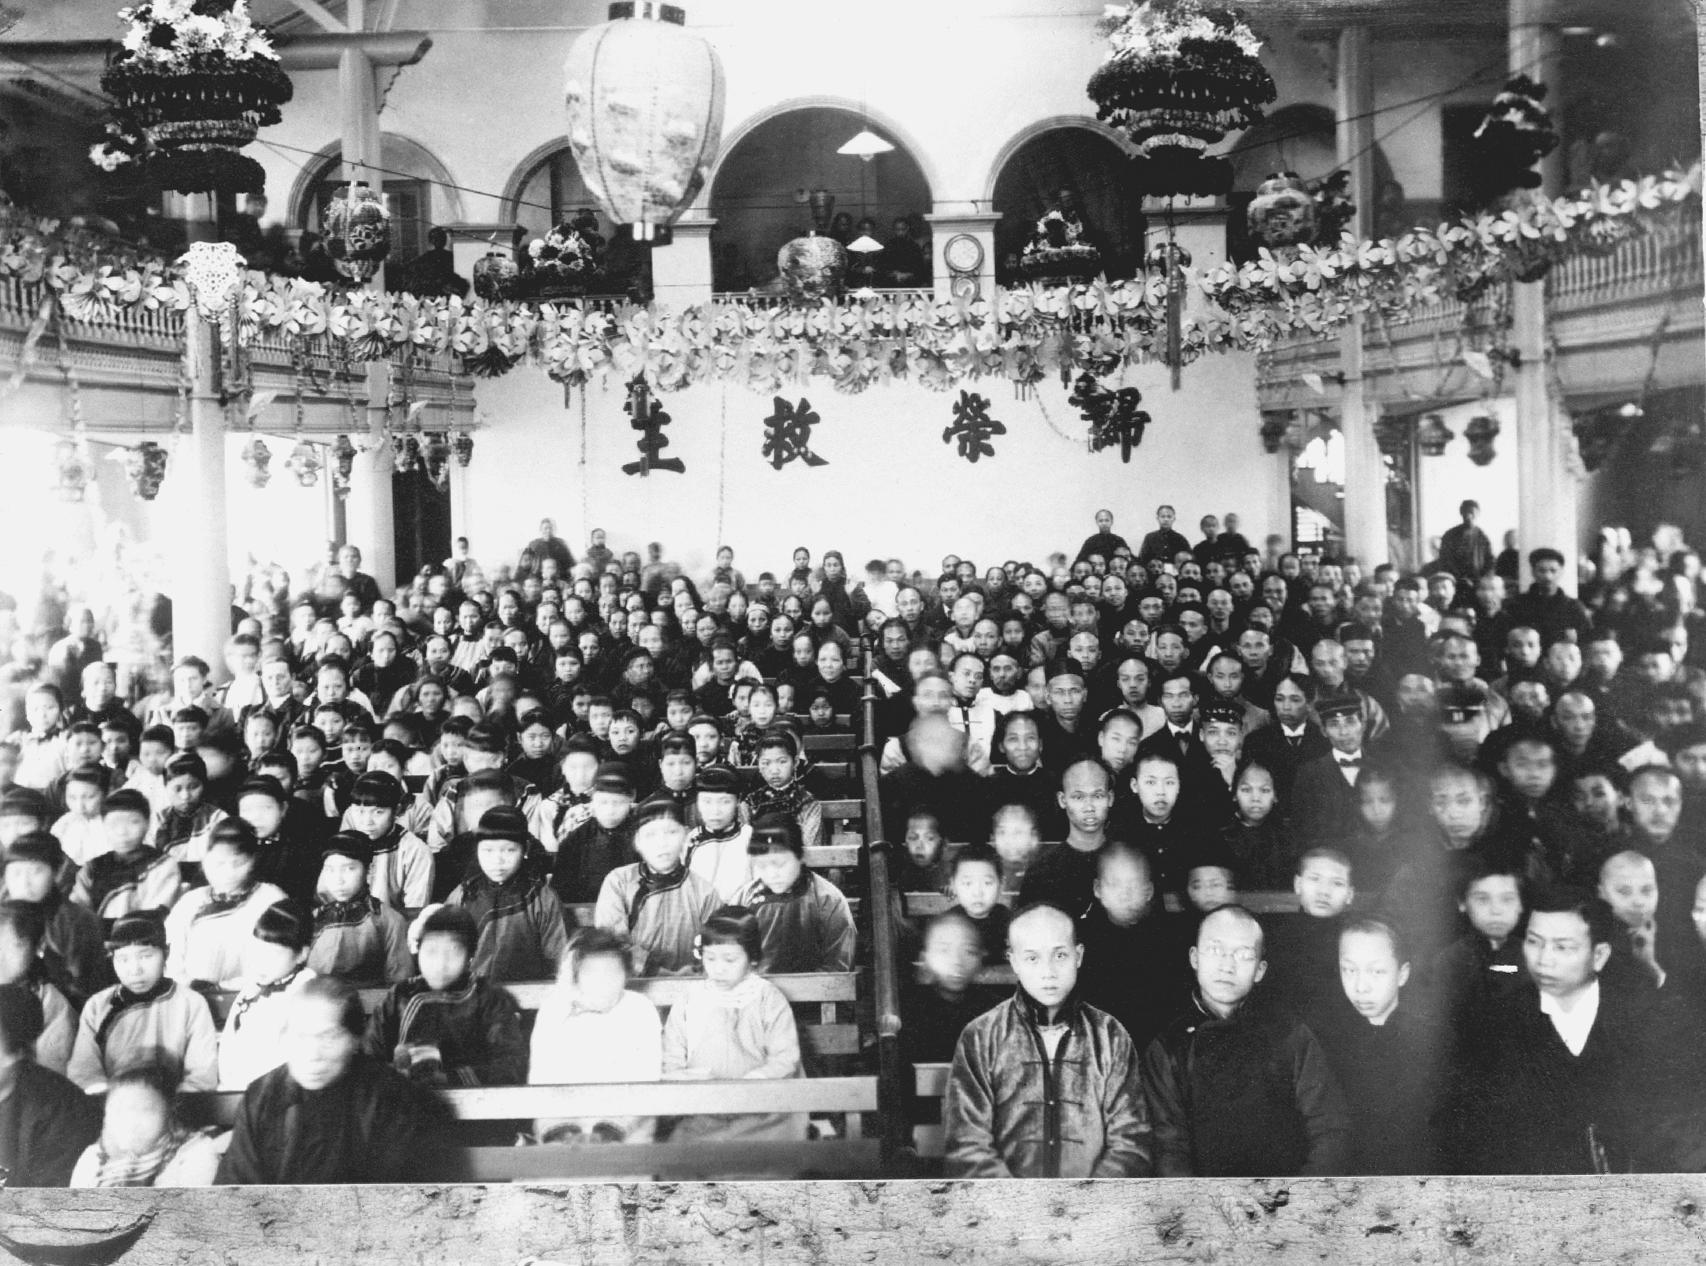 Christian members of the 2nd Church of Canton  廣州.